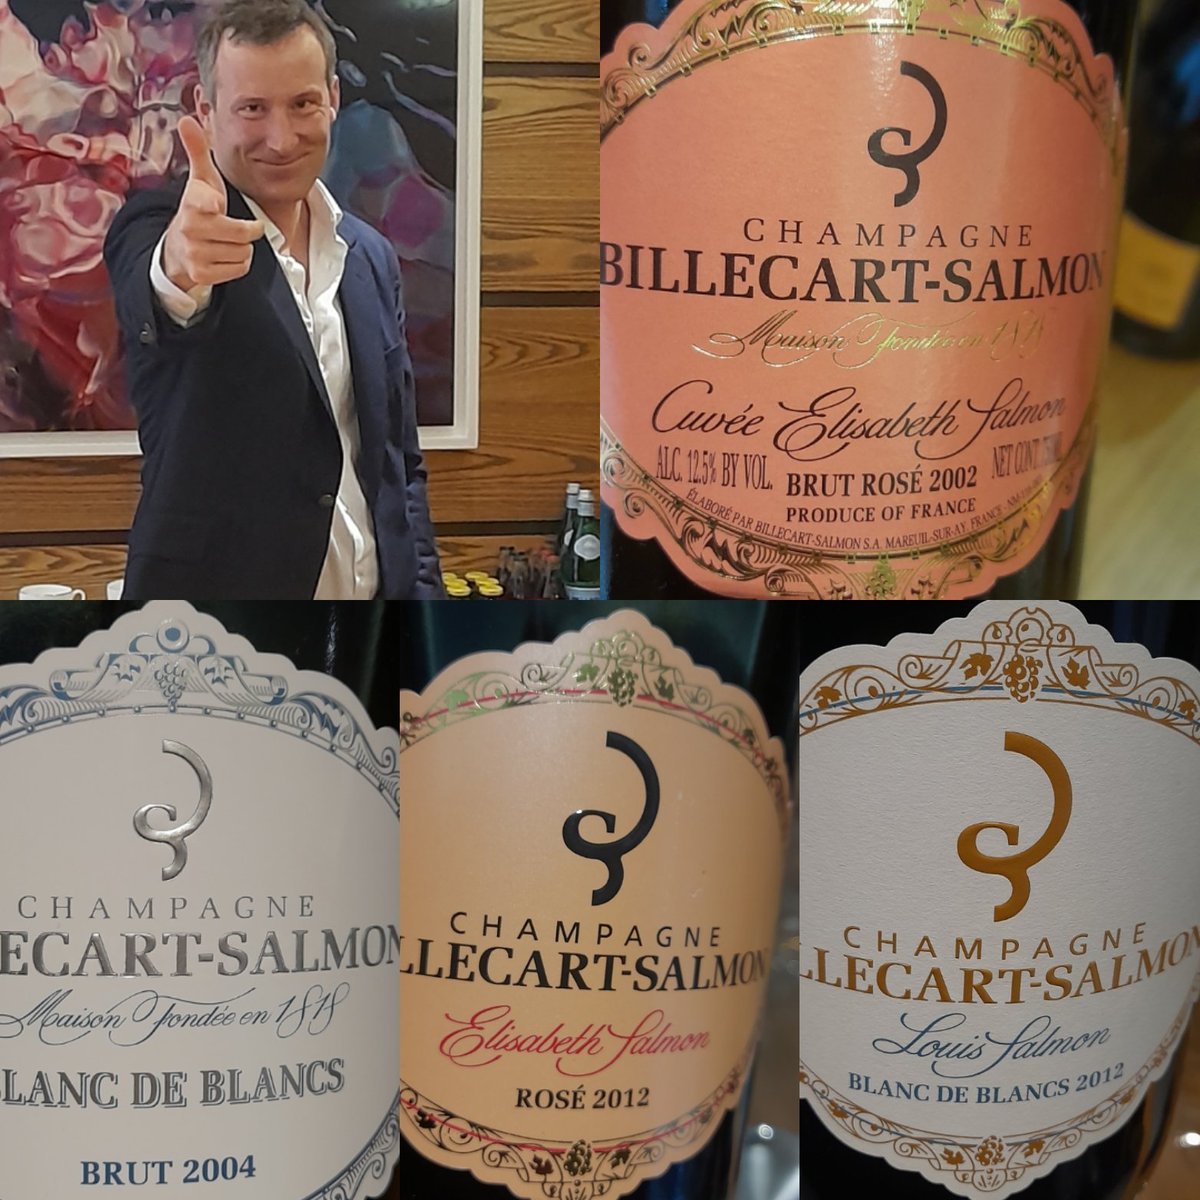 Always such a pleasure to taste with Mathieu @mrbillecart !!!! Today he launched the #2012 founders' cuvées of #ElisabethSalmon2012 #rosé and #LouisSalmon2012 #blancdeblancs Tasting notes soon in @worldoffinewine @champagne_billecart_salmon